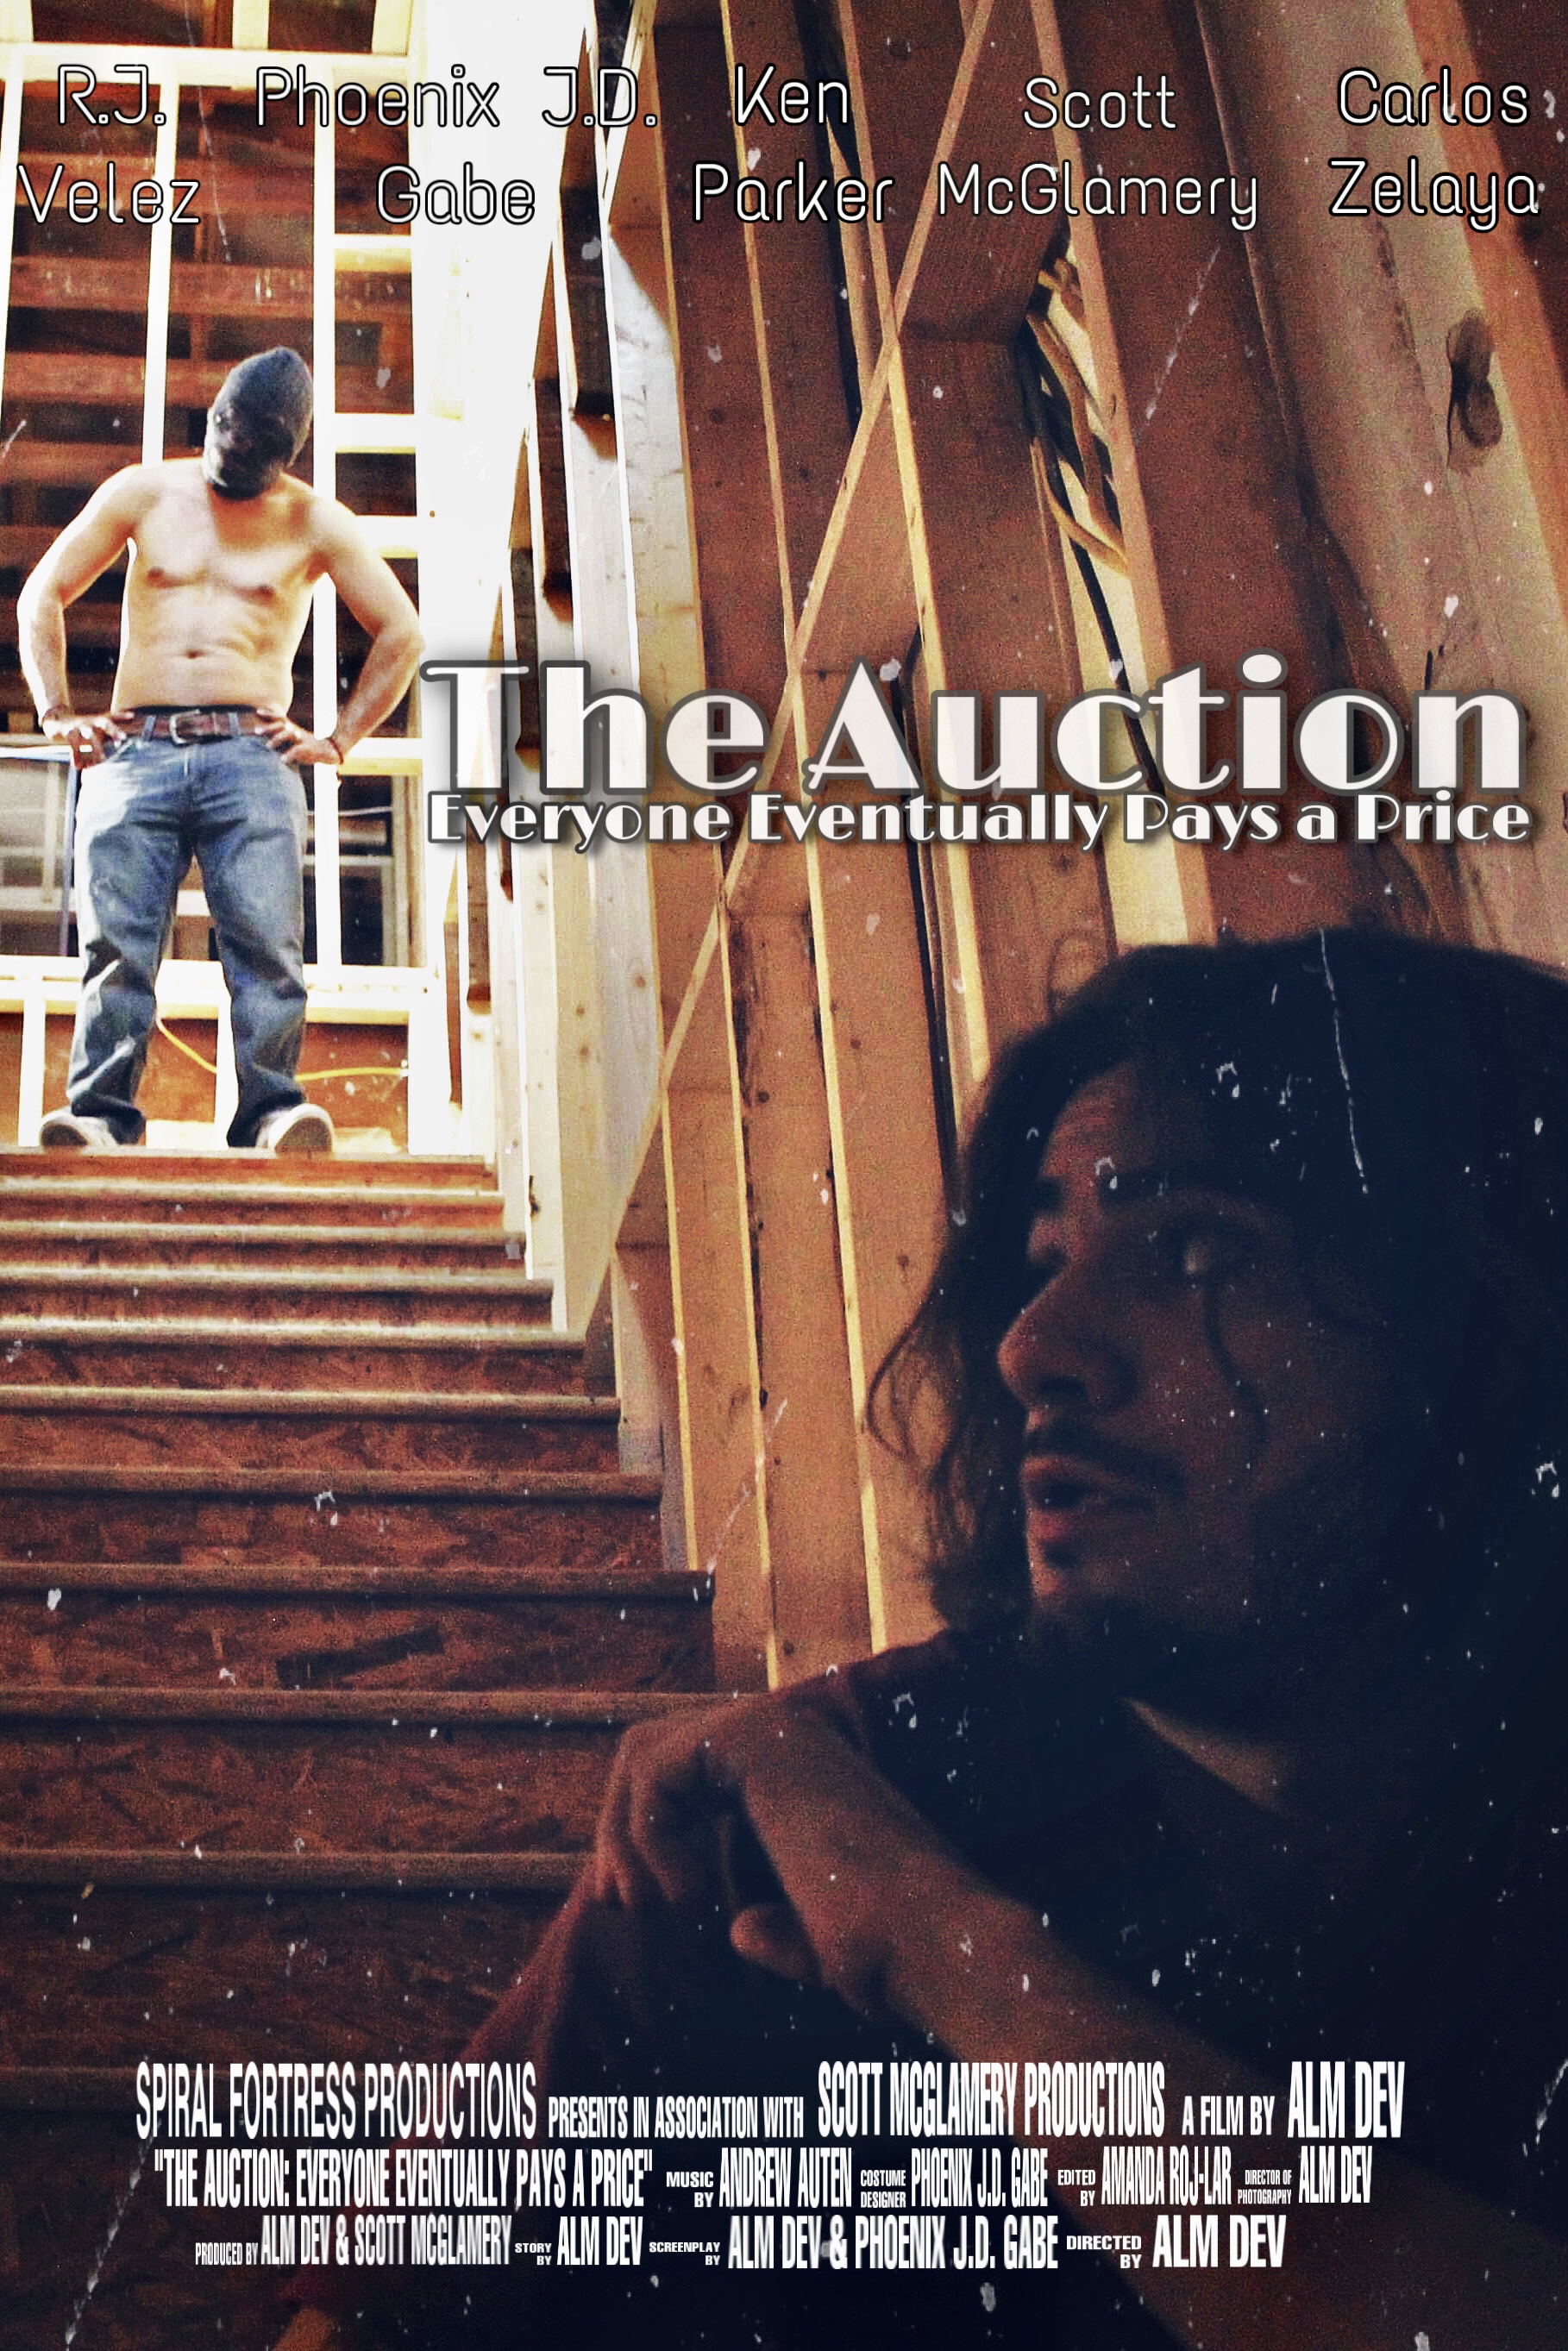 The Auction- Every one eventually pays a price (2021)